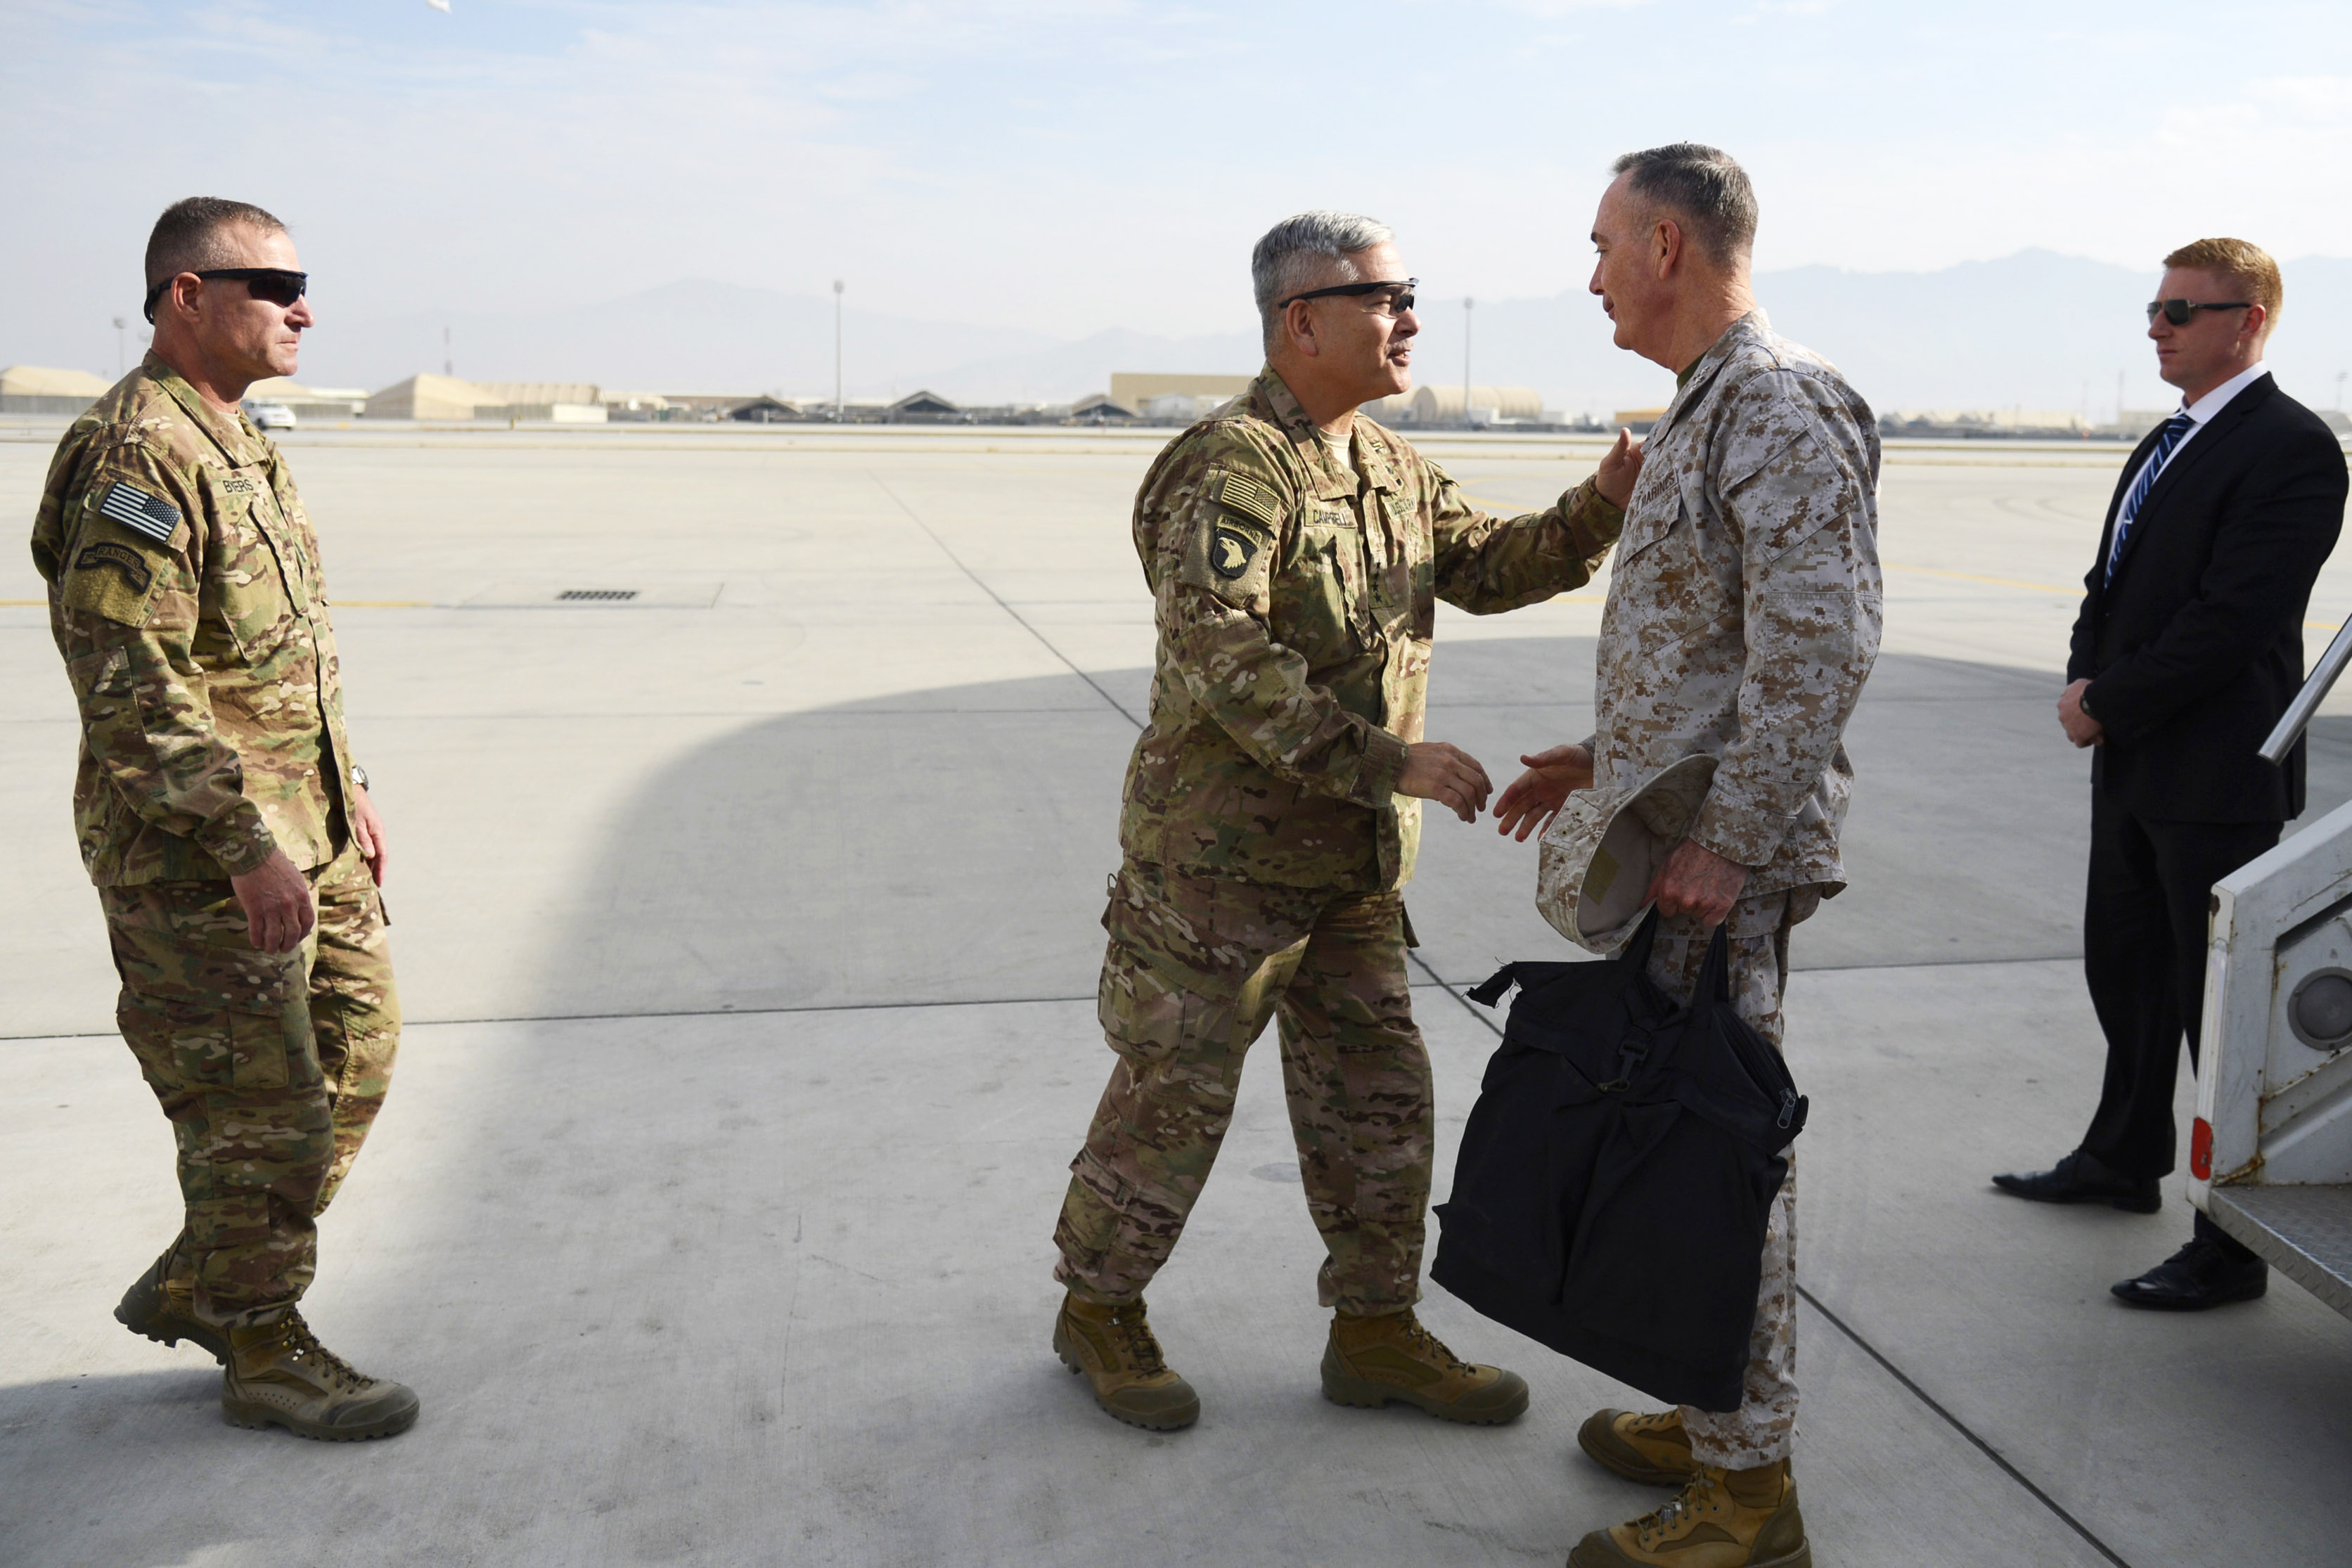 U.S. Army Gen. John Campbell shaking hands with U.S. Marine Corps Gen. Joseph F. Dunford Jr., chairman of the Joint Chiefs of Staff, on the tarmac